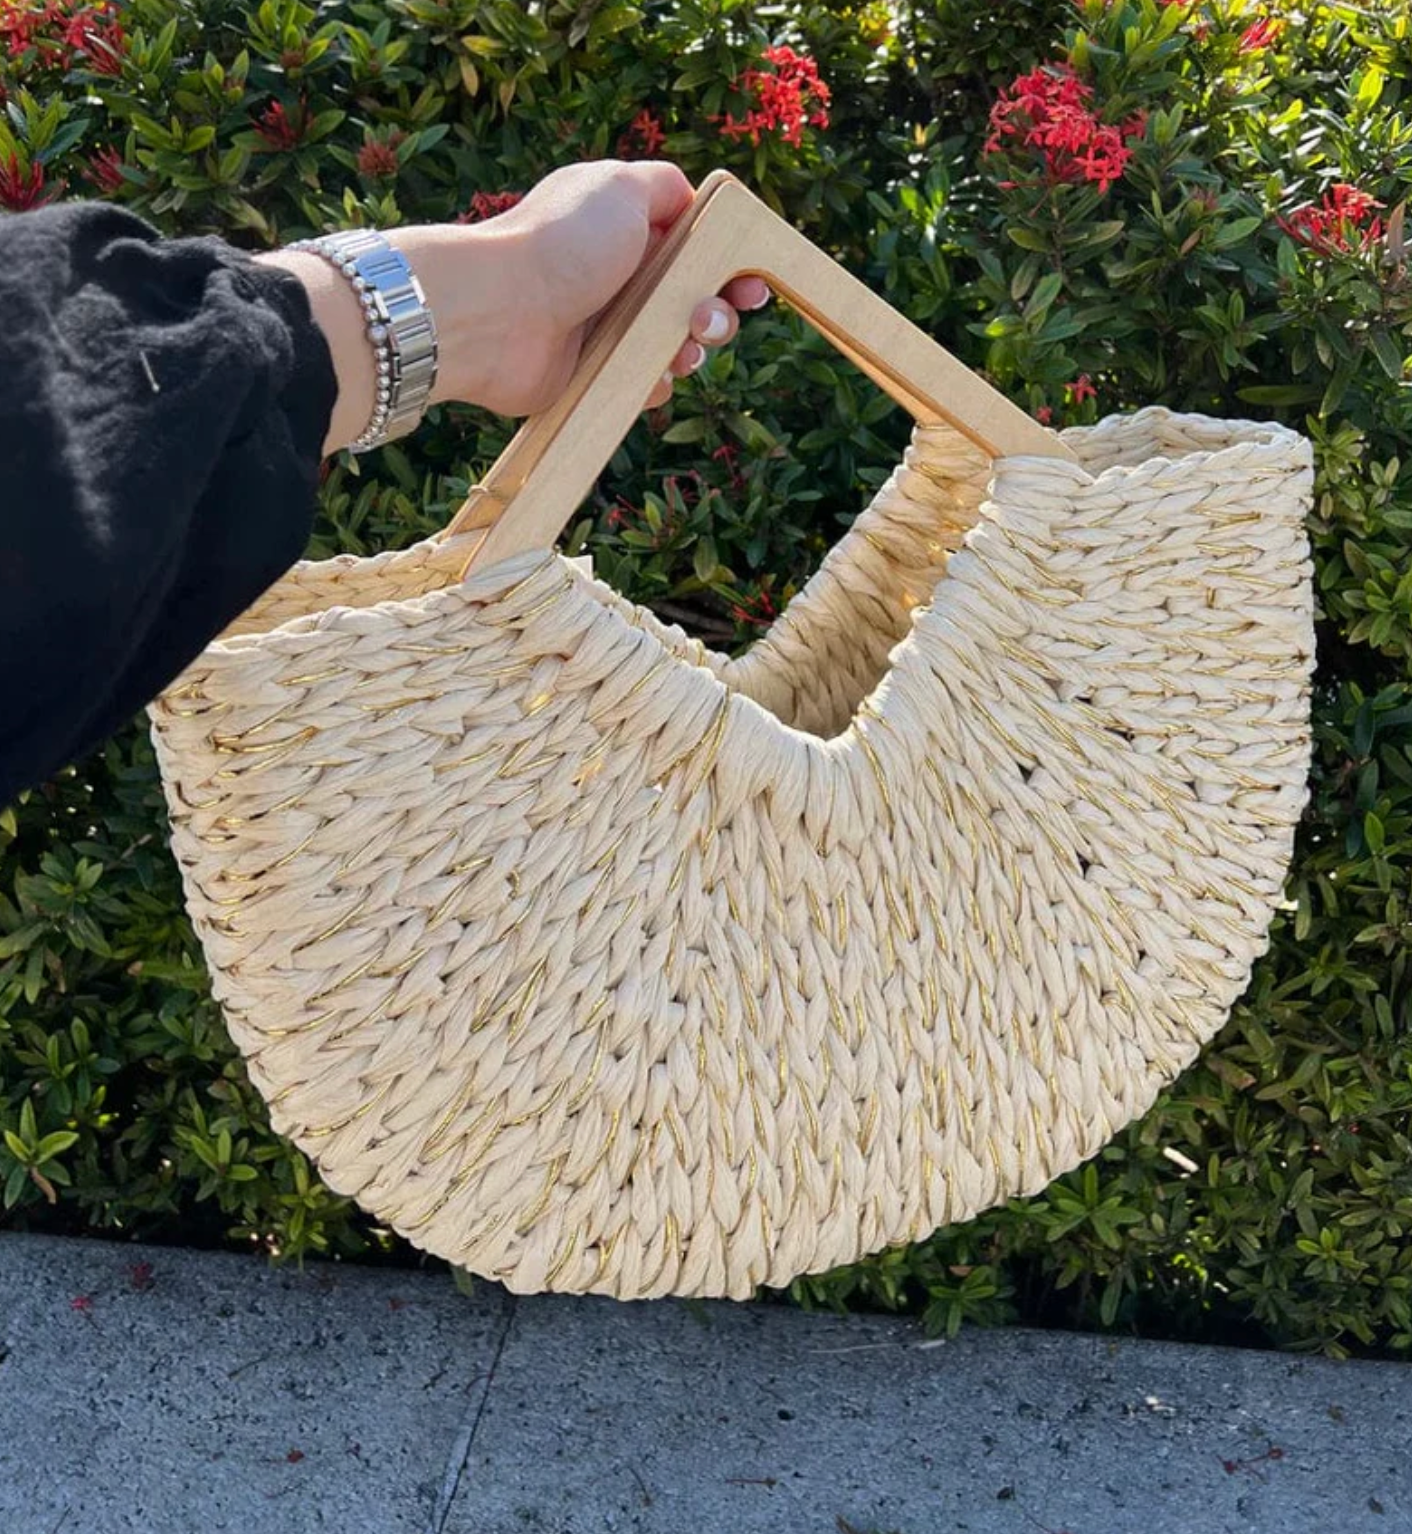 Isabella Wooden Handle Straw Tote Bag